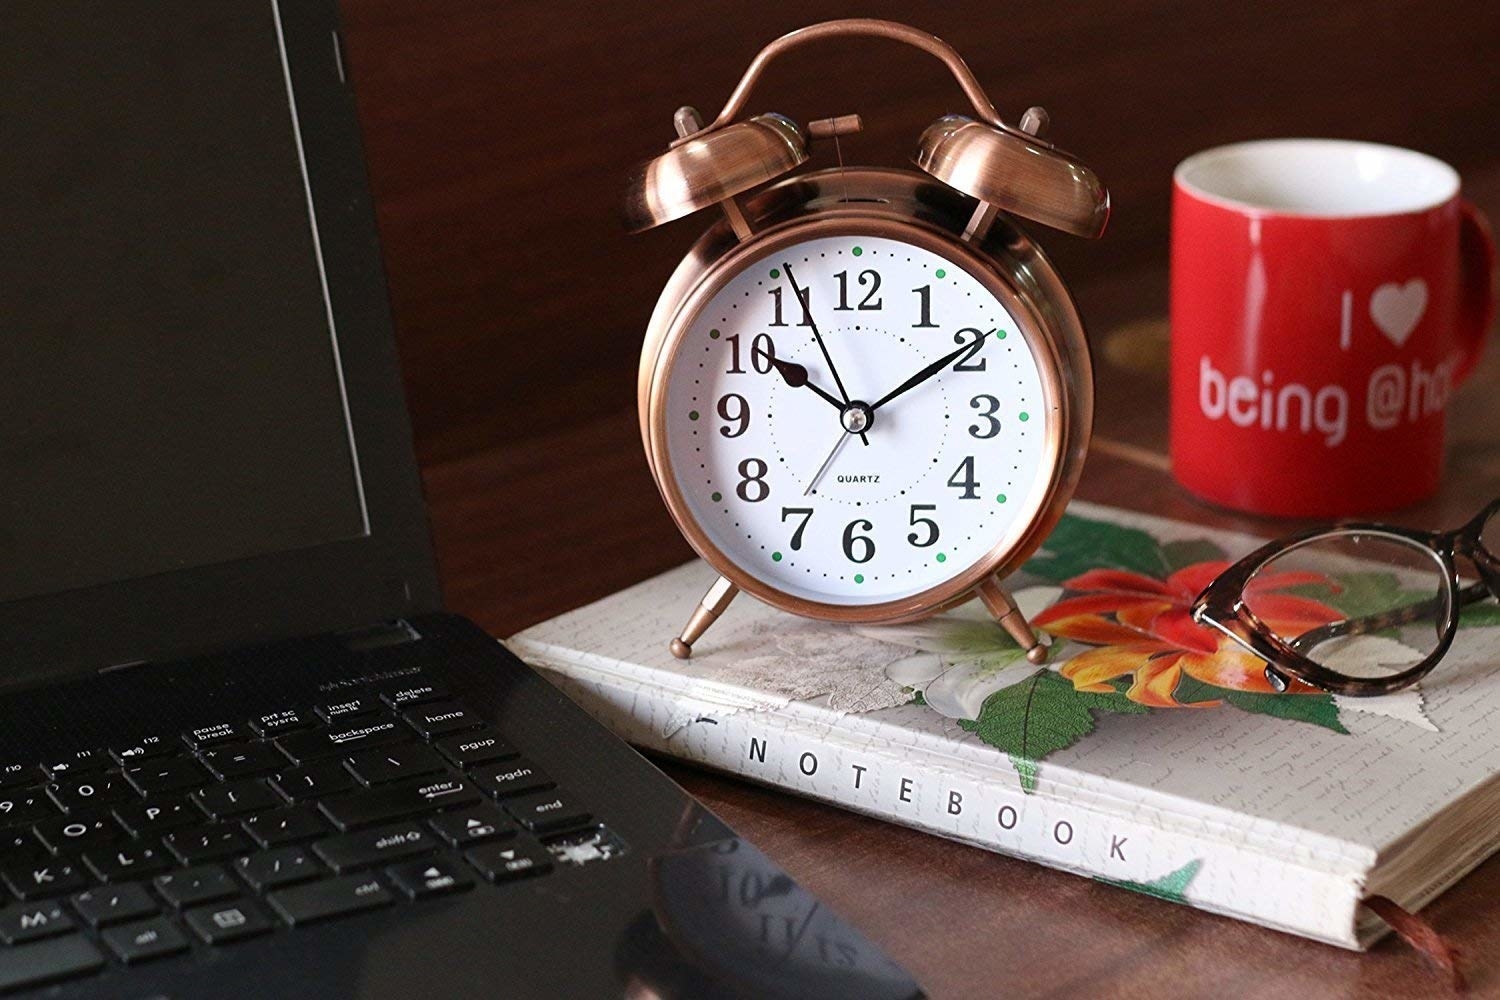 A copper-coloured metal analogue alarm clock kept on a notebook next to a laptop.